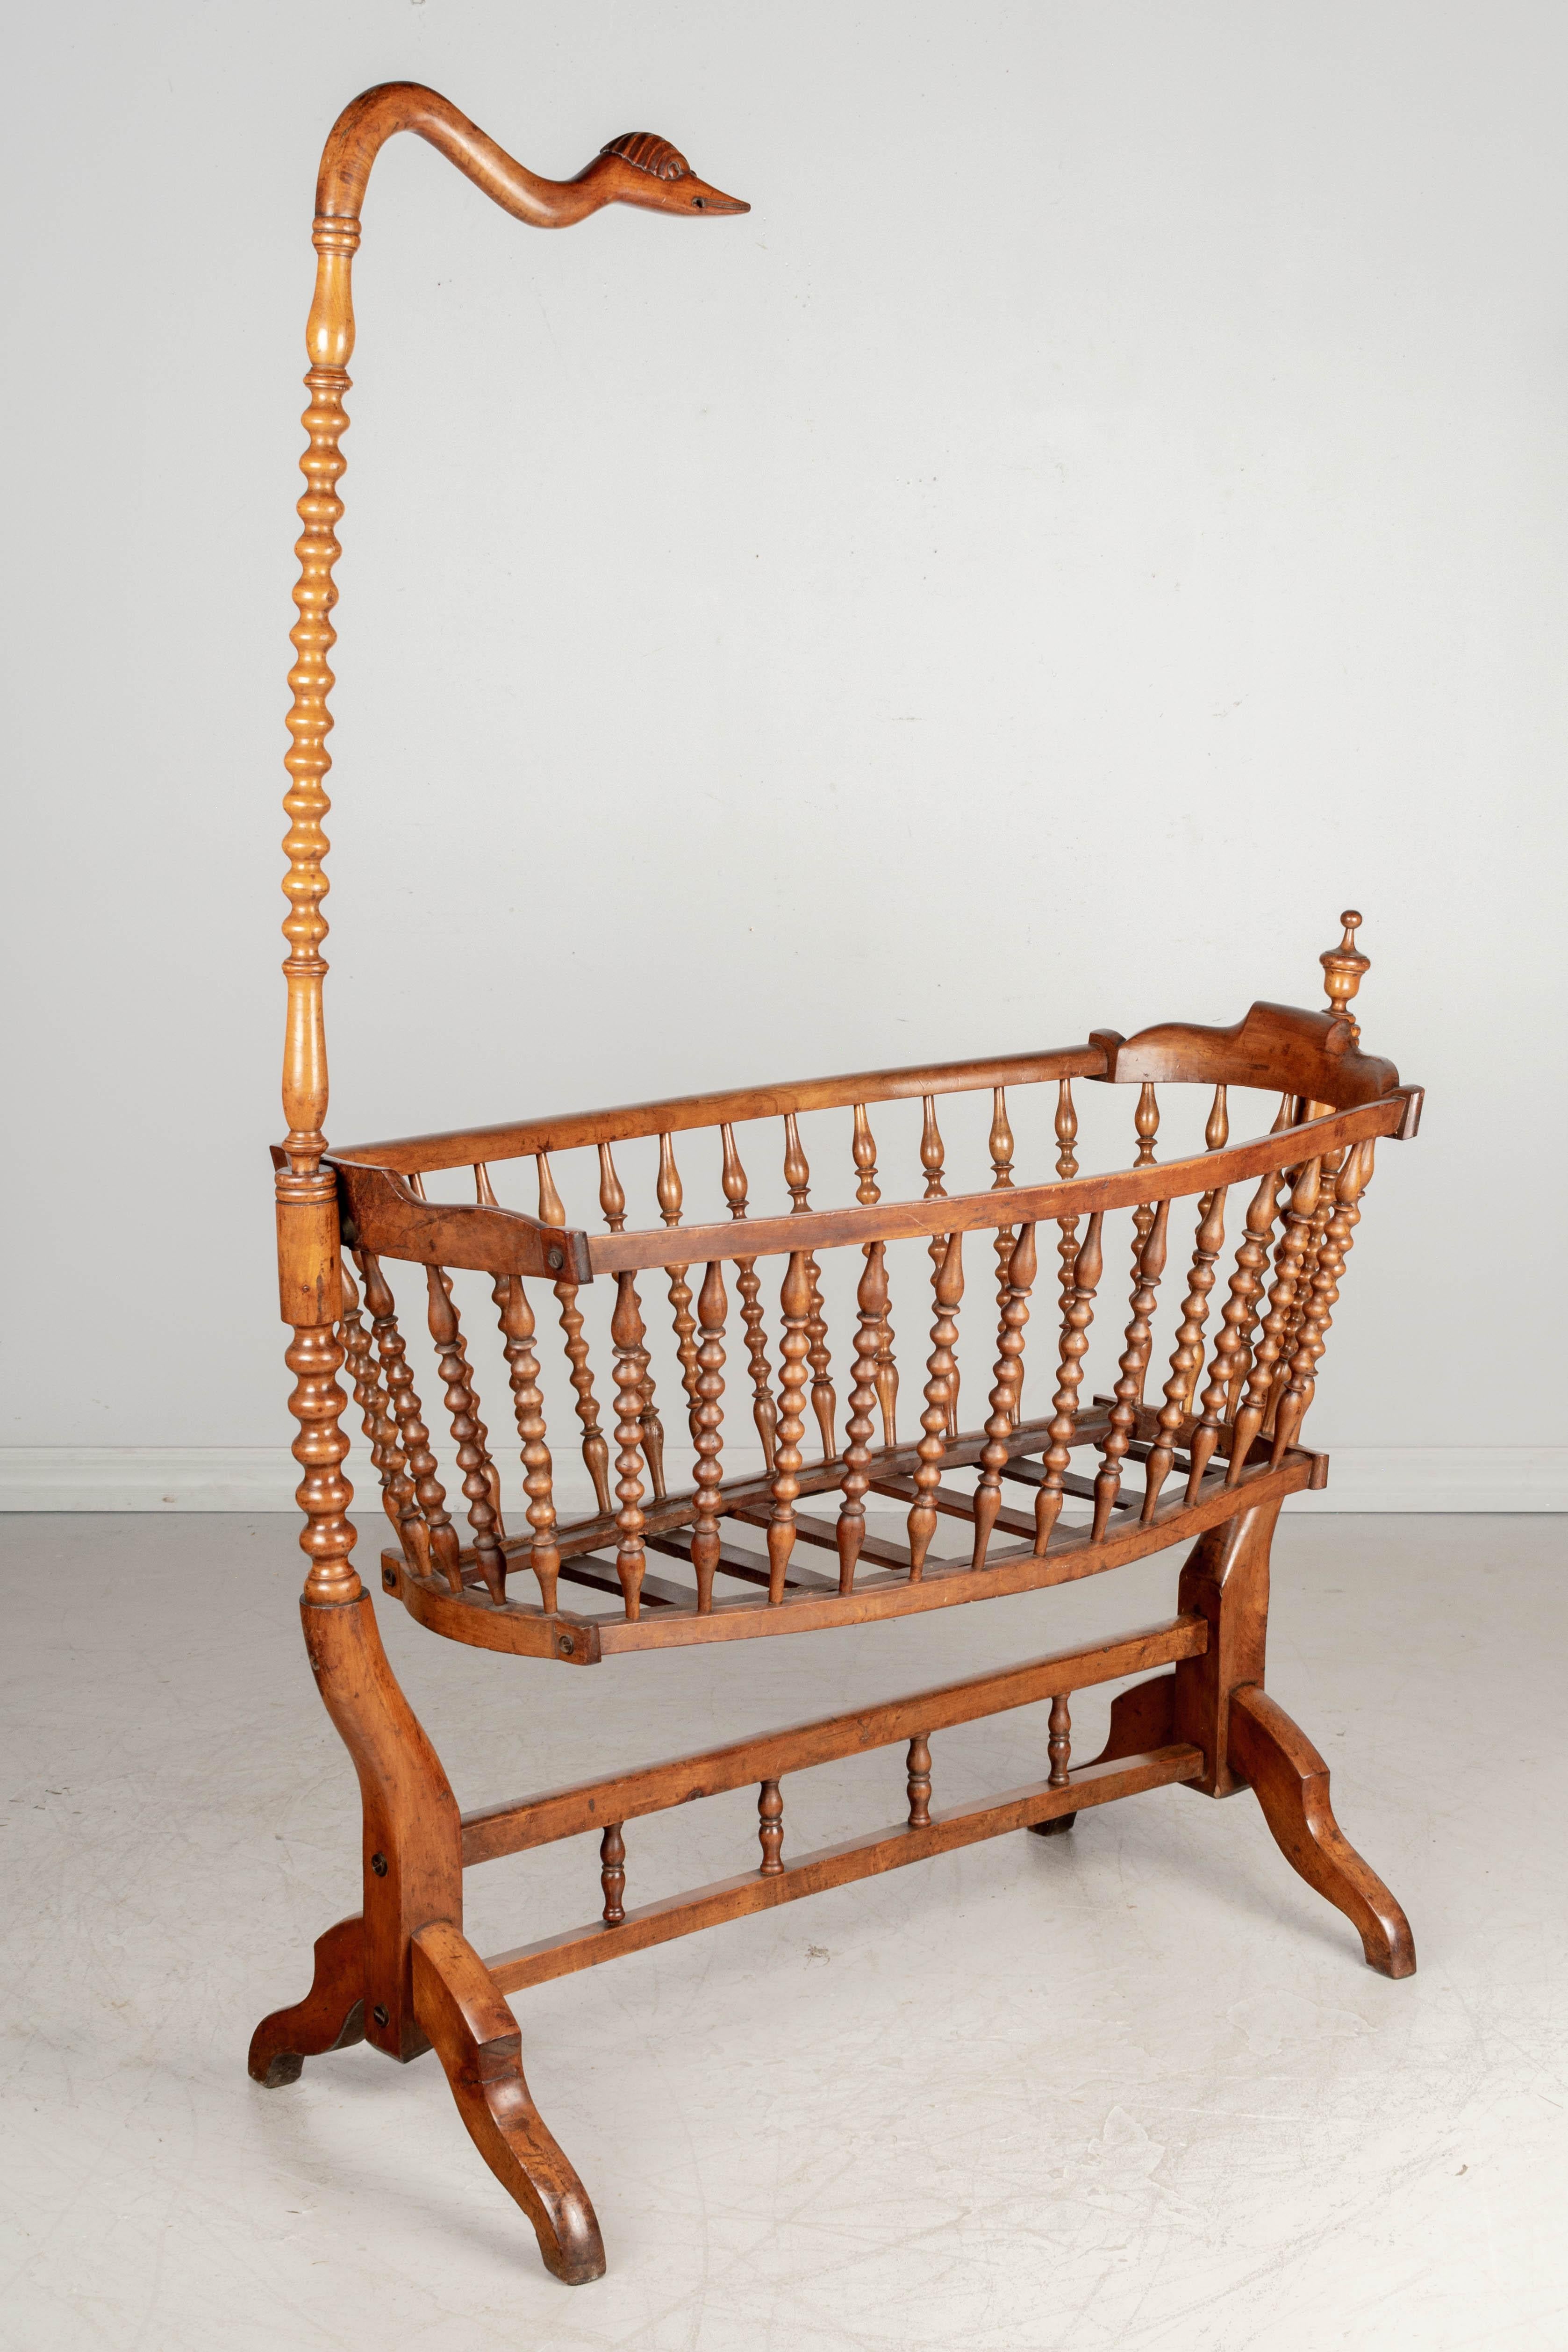 A 19th century French baby cradle from the Provence region made of mahogany with nicely turned spindle rails. Fitted with a tall pole with a carved swan head that was used to attach a fabric netting. The cradle gently rocks on the sturdy frame.